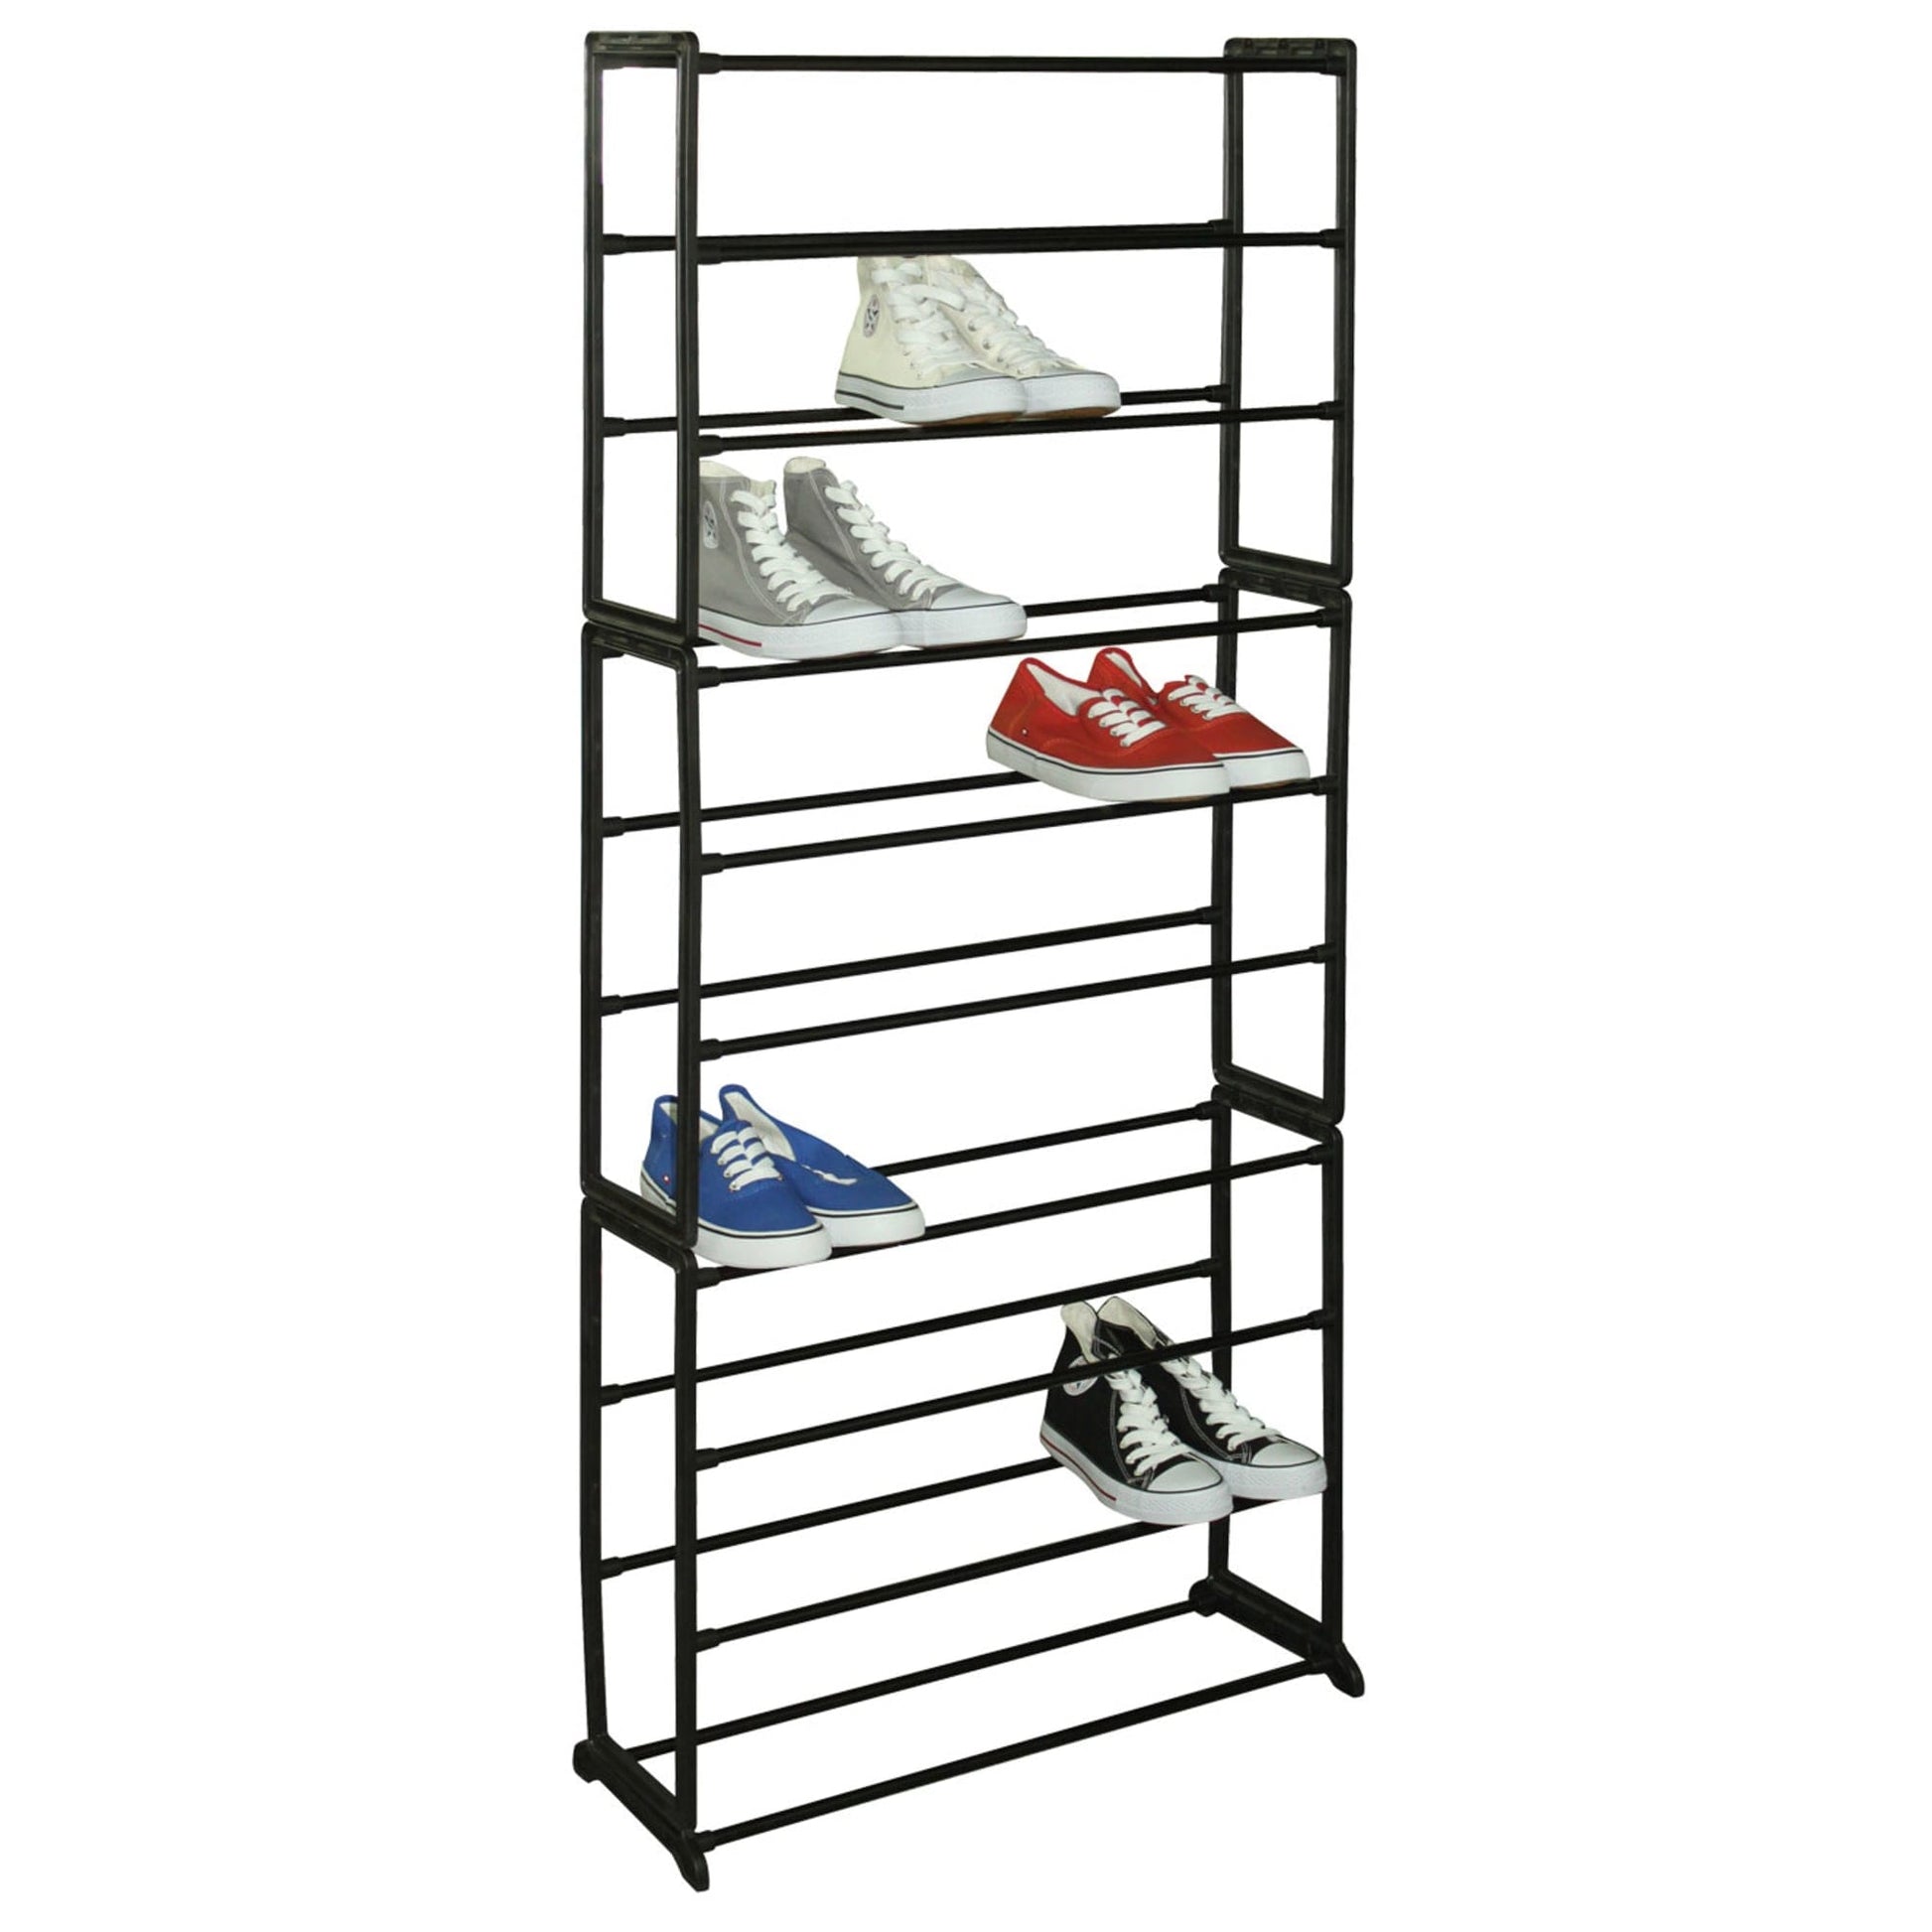 IdeaWorks Ideaworks-30 Pair Rack Shoe Shelf Organizer Rolls Up-Promotes  Dust Protection-Zip Keeps Cover Closure Closed